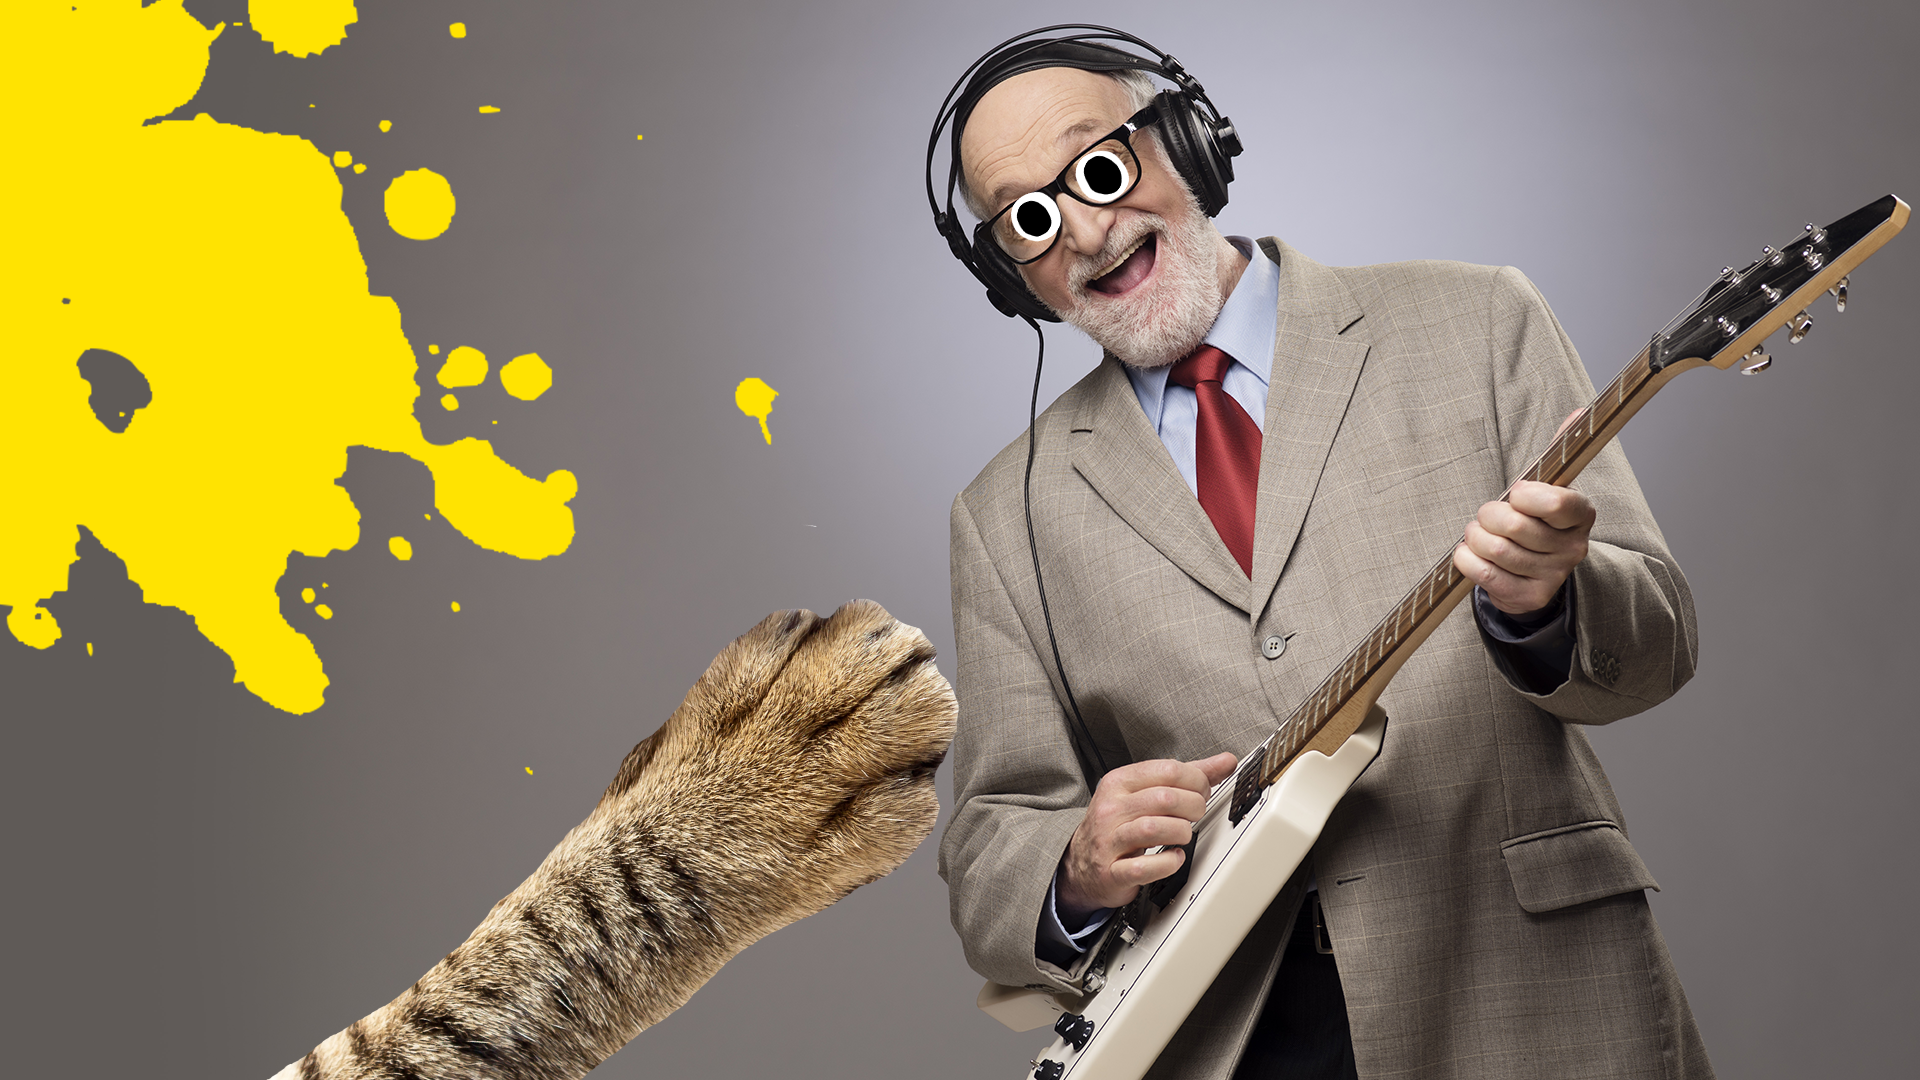 Man playing guitar with paw and splats 